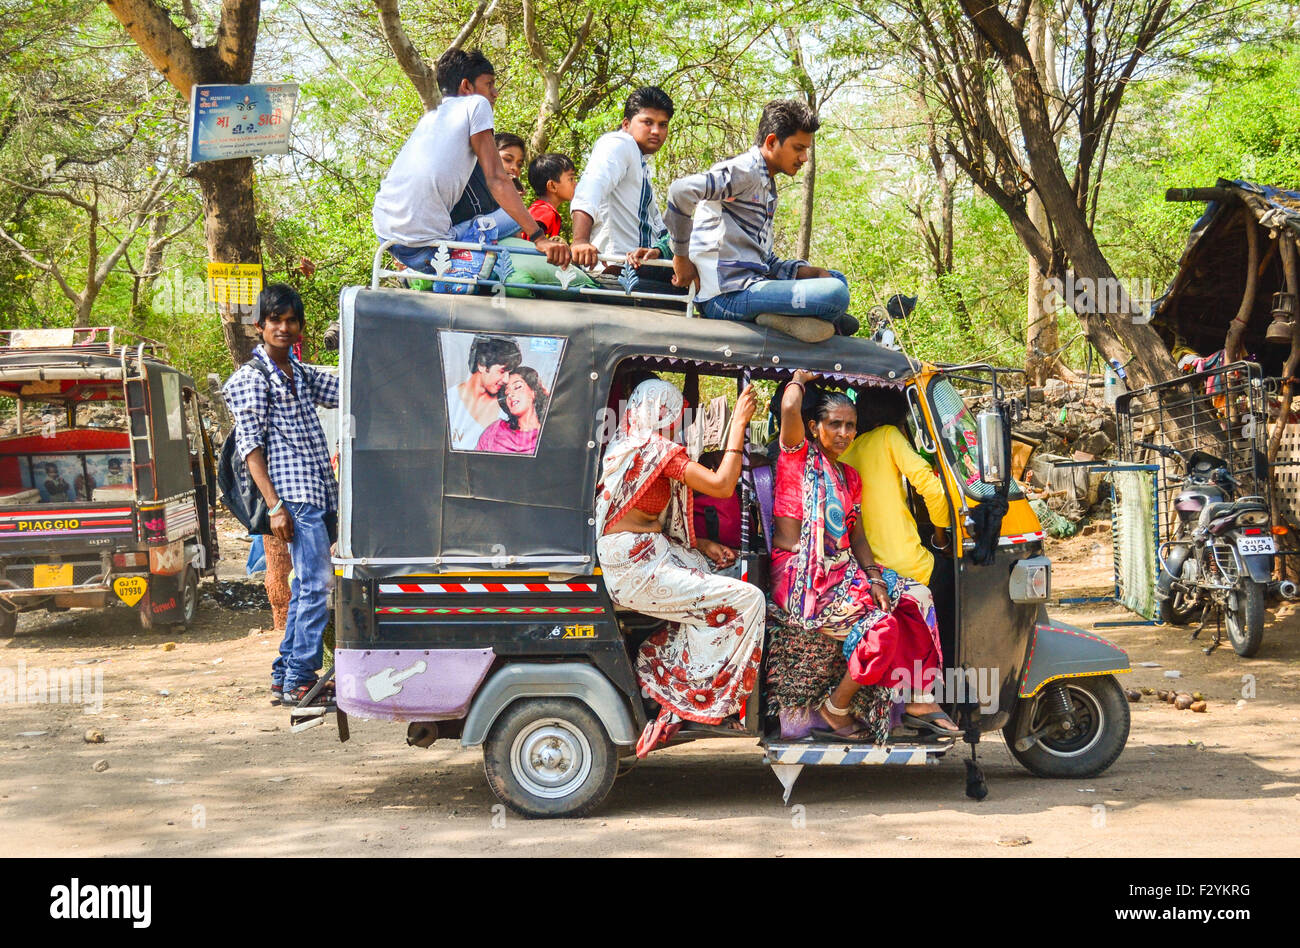 An auto-rickshaw overloaded with people, posing a threat to passengers and road users in Gujarat, India Stock Photo